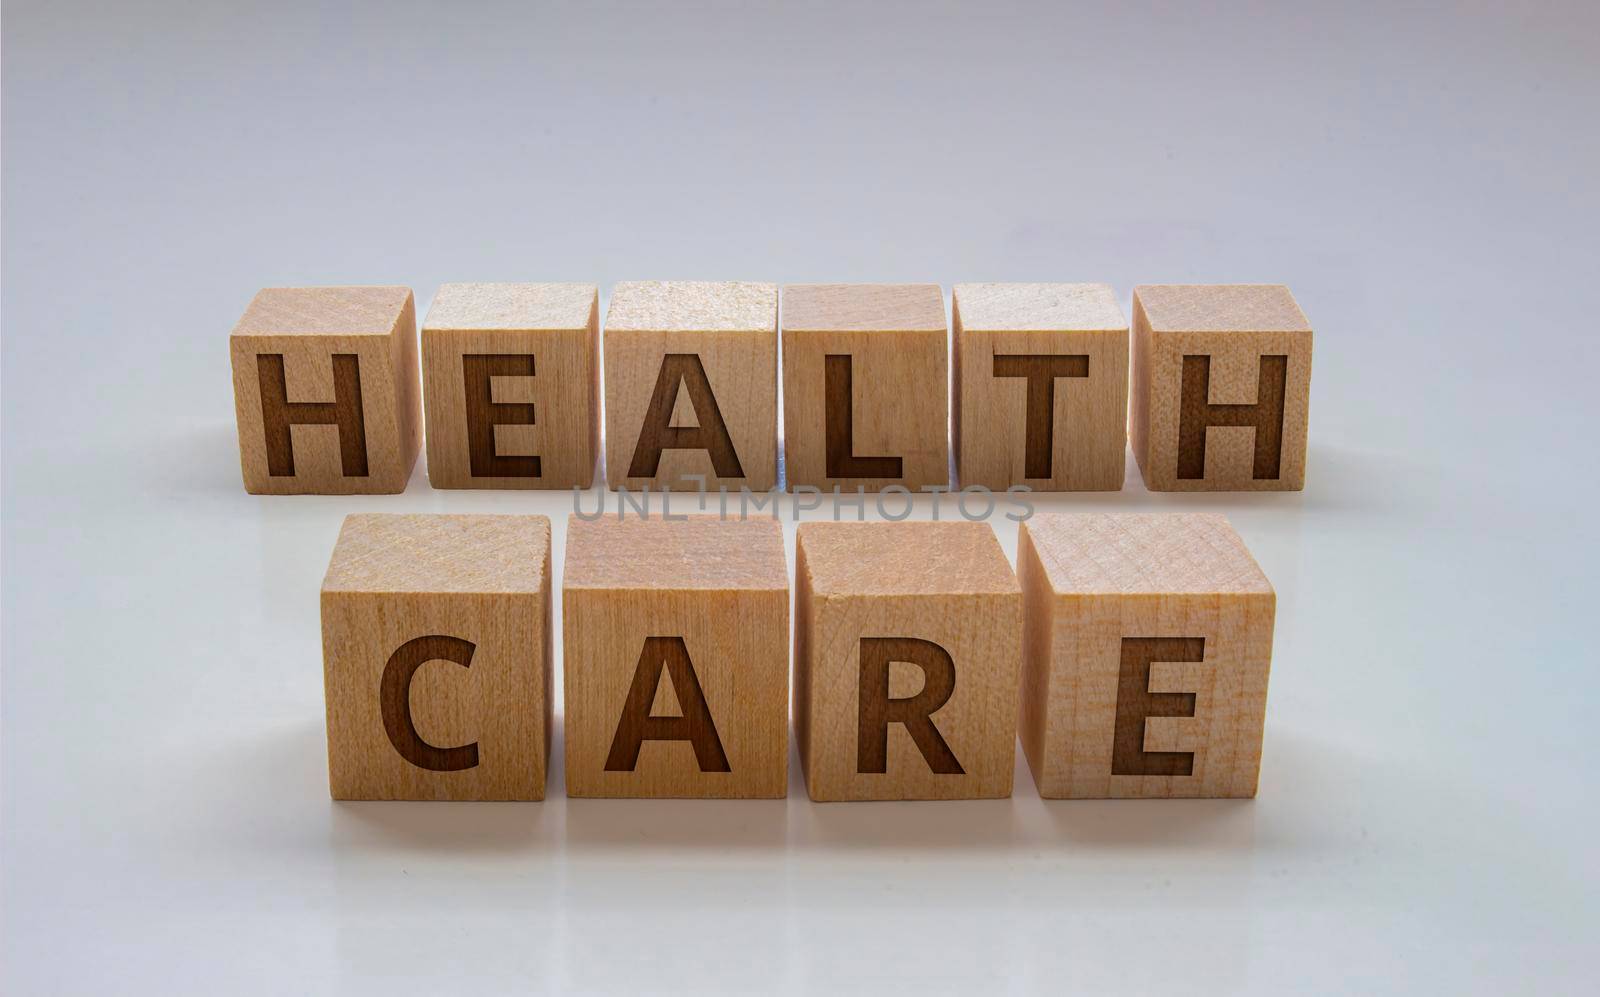 Wooden blocks with the text: "Health Care" on a clear background by oasisamuel